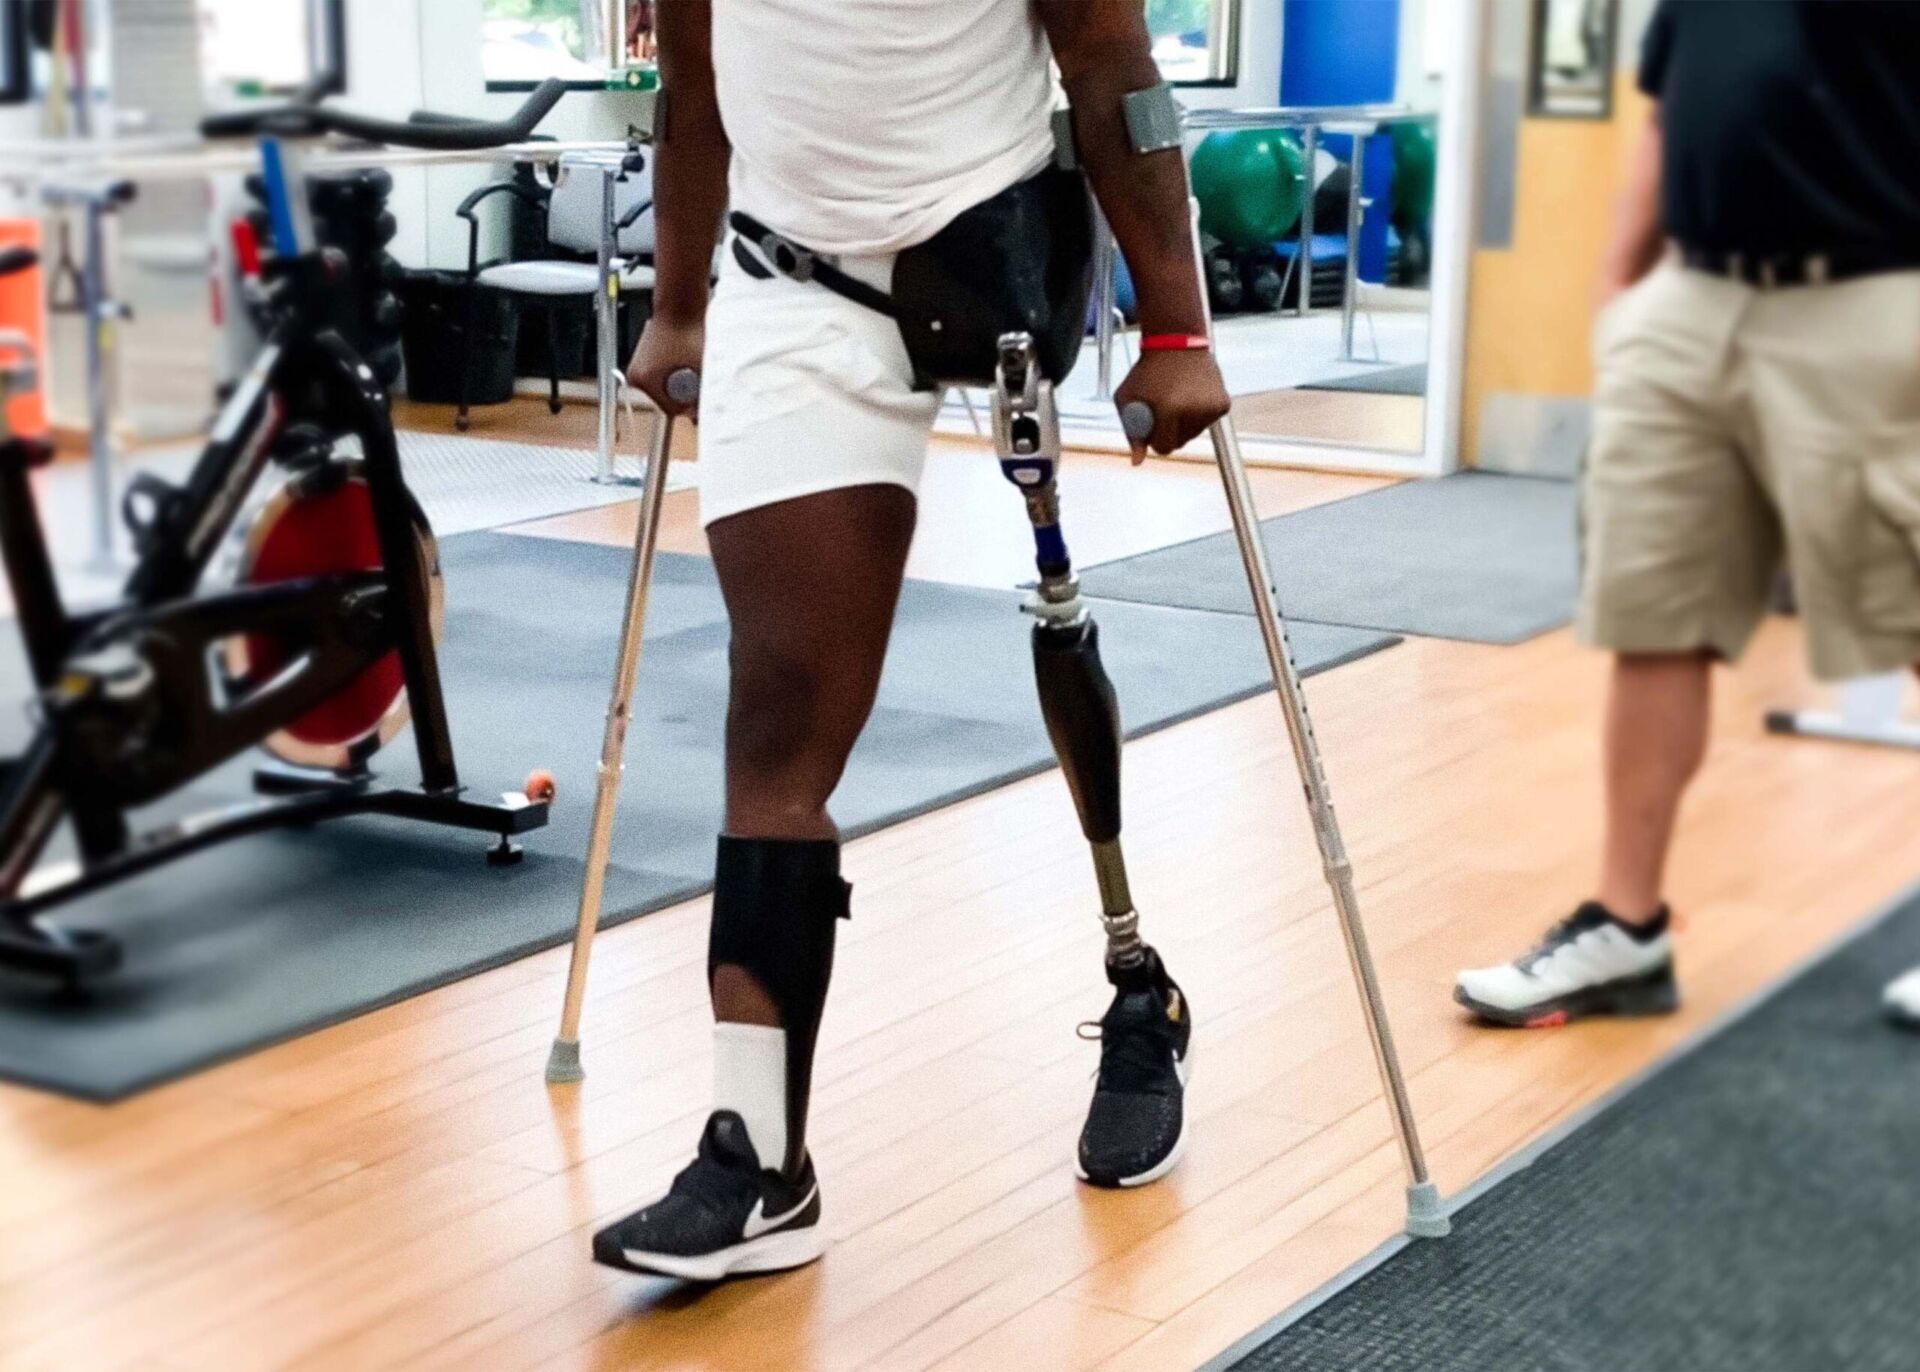 Learn more about prosthetics and orthotics.